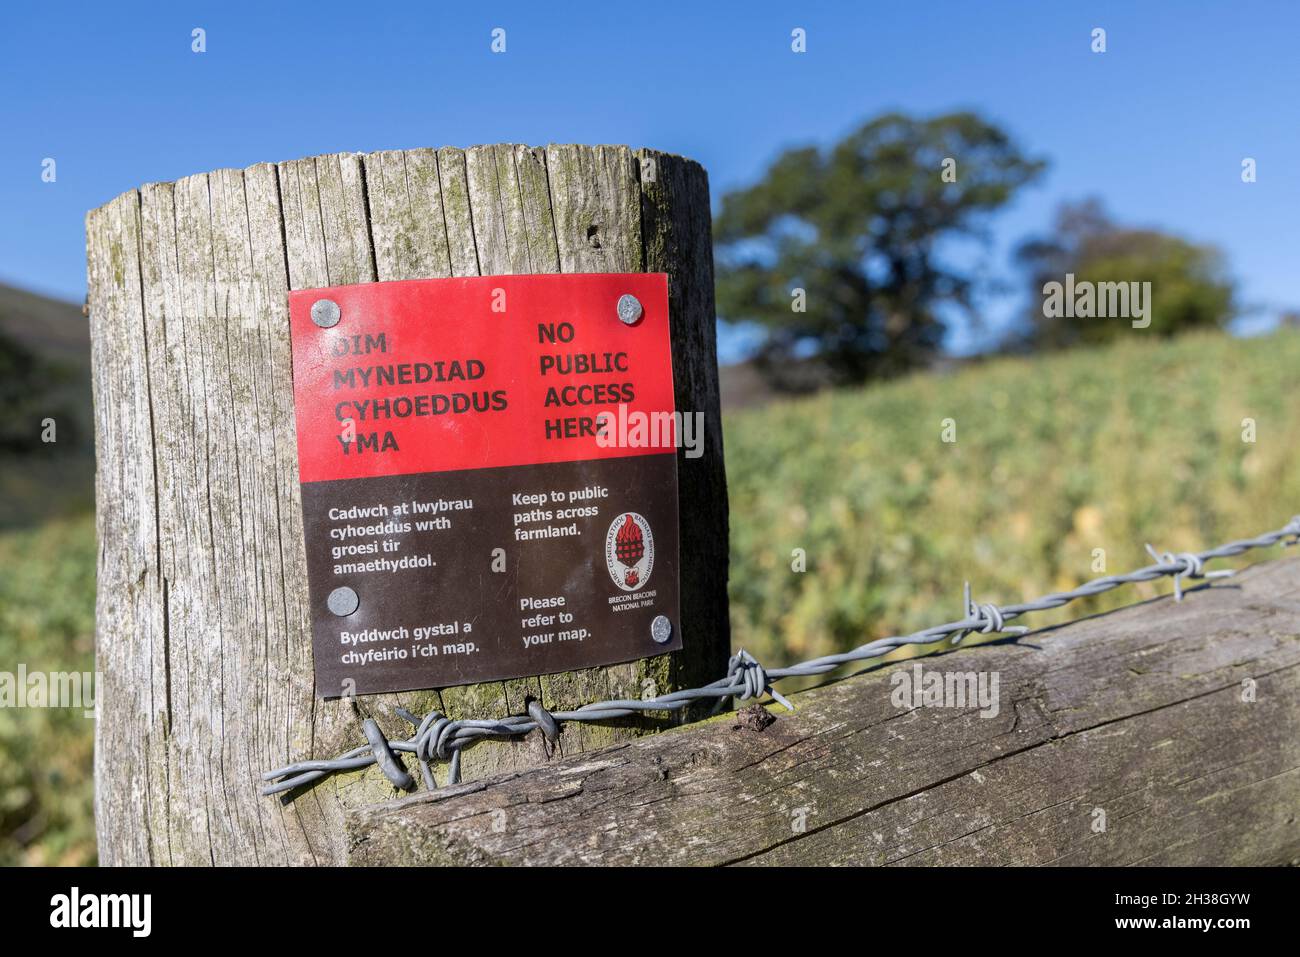 No public access sign on fence post in English and Welsh, Black Mountains, Wales, UK Stock Photo